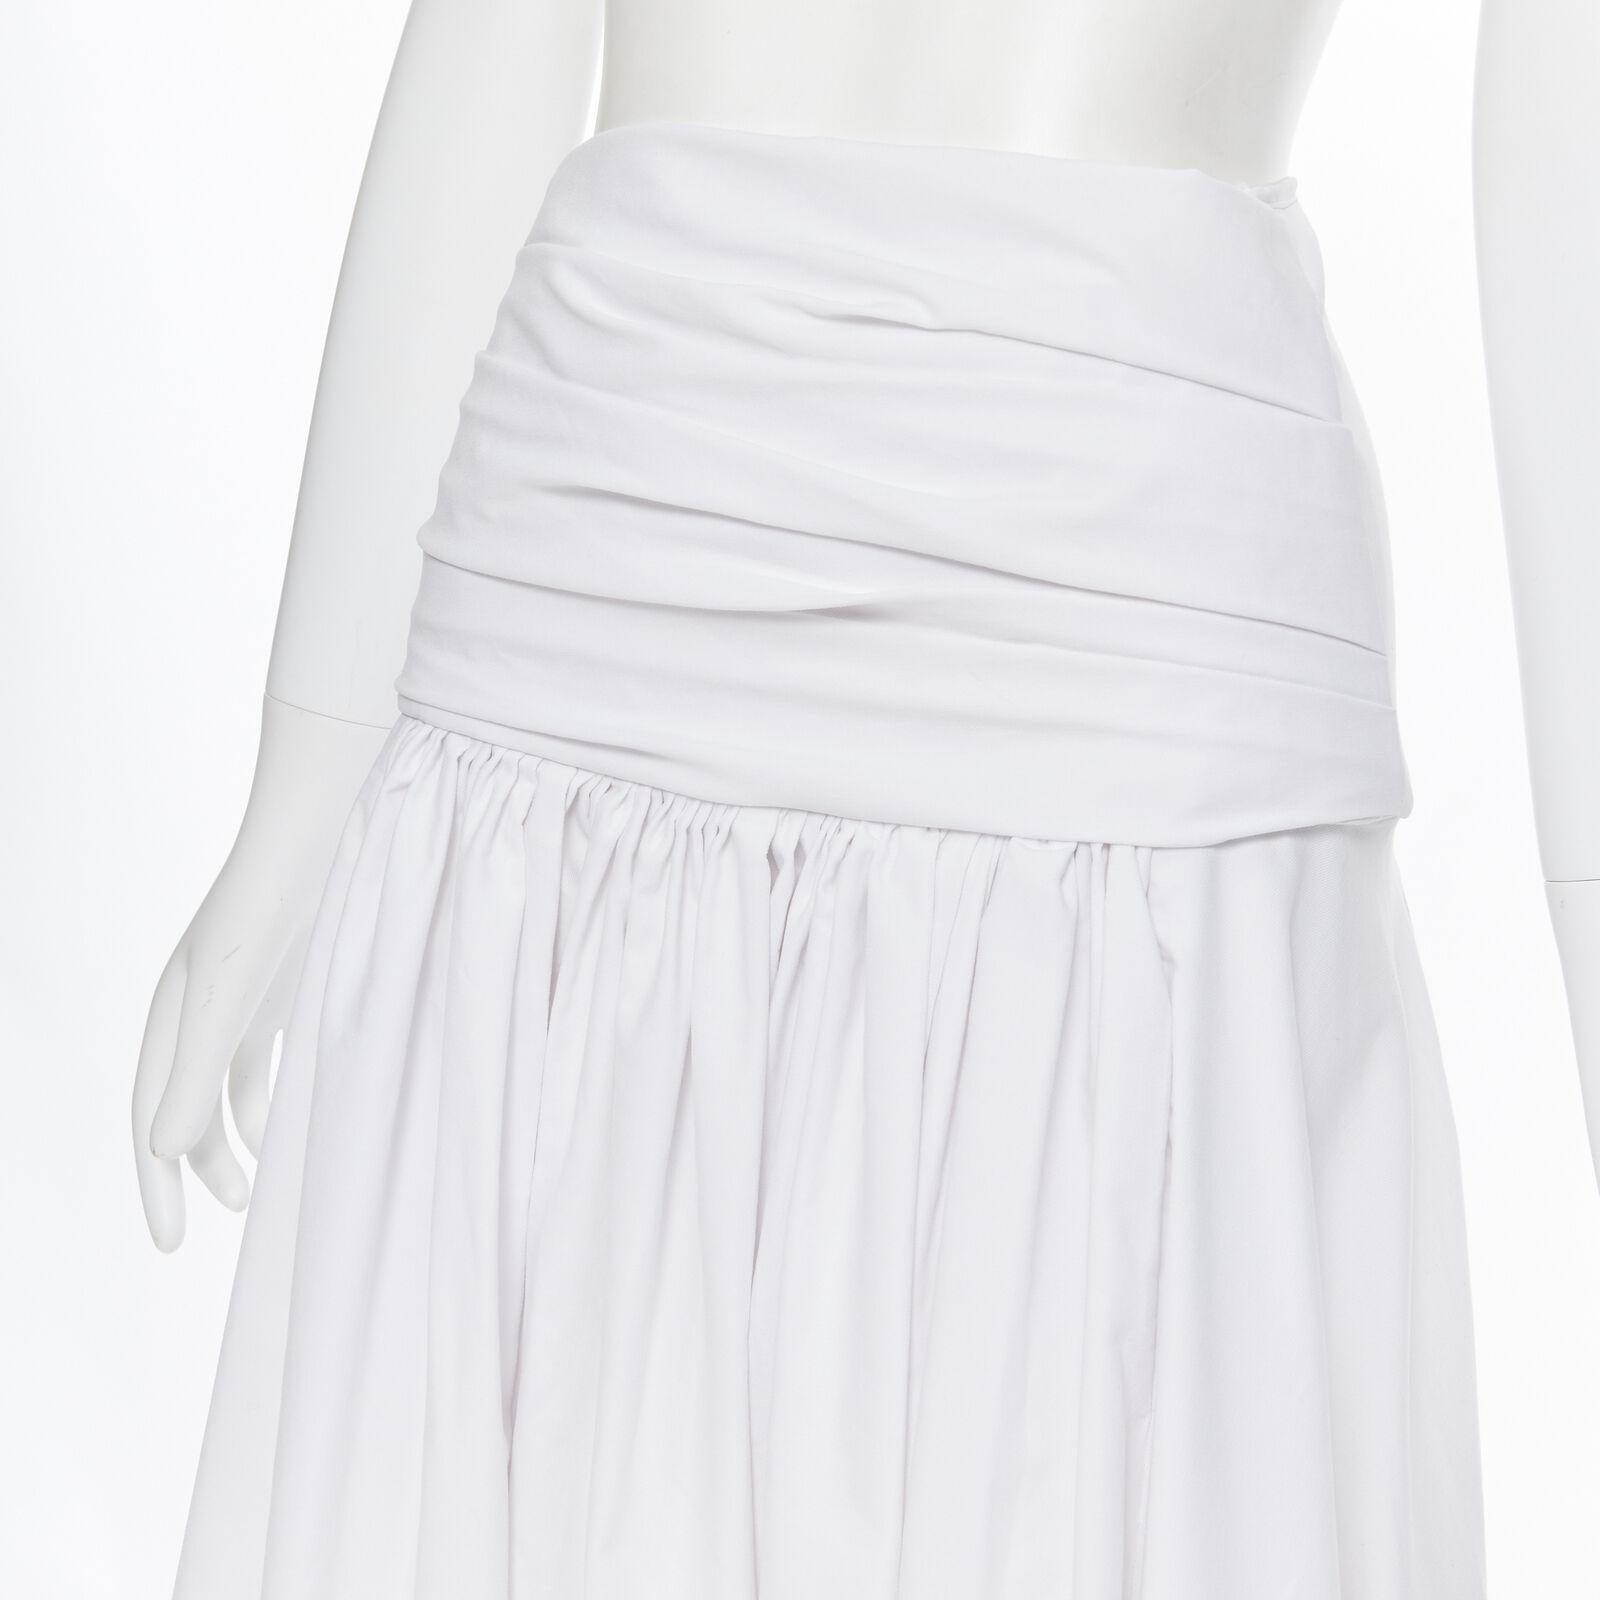 MATICEVSKI white ruched waist band pleated flared maxi dress XS
Reference: LNKO/A01656
Brand: Maticevski
Model: Maxi skirt
Material: Others
Color: White
Pattern: Solid
Closure: Zip
Extra Details: Rusched waist. Pleated flared skirt. Zip back